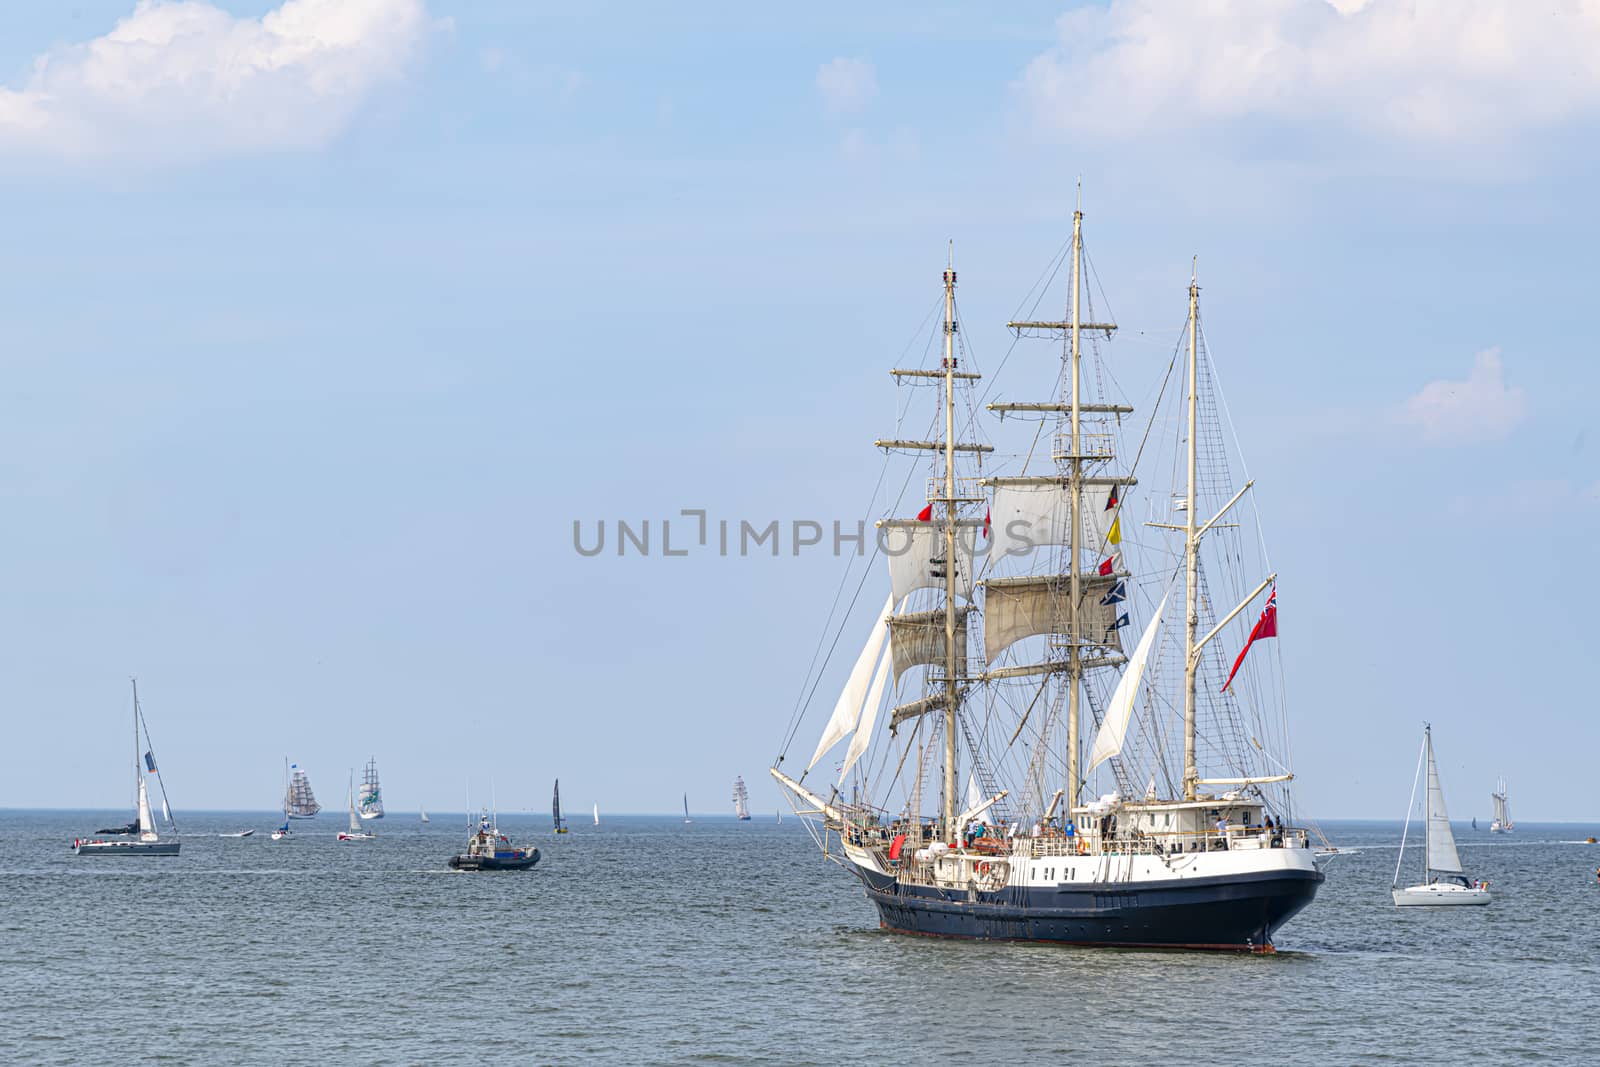 Antique tall ship, vessel leaving the harbor of The Hague, Scheveningen under a sunny and blue sky